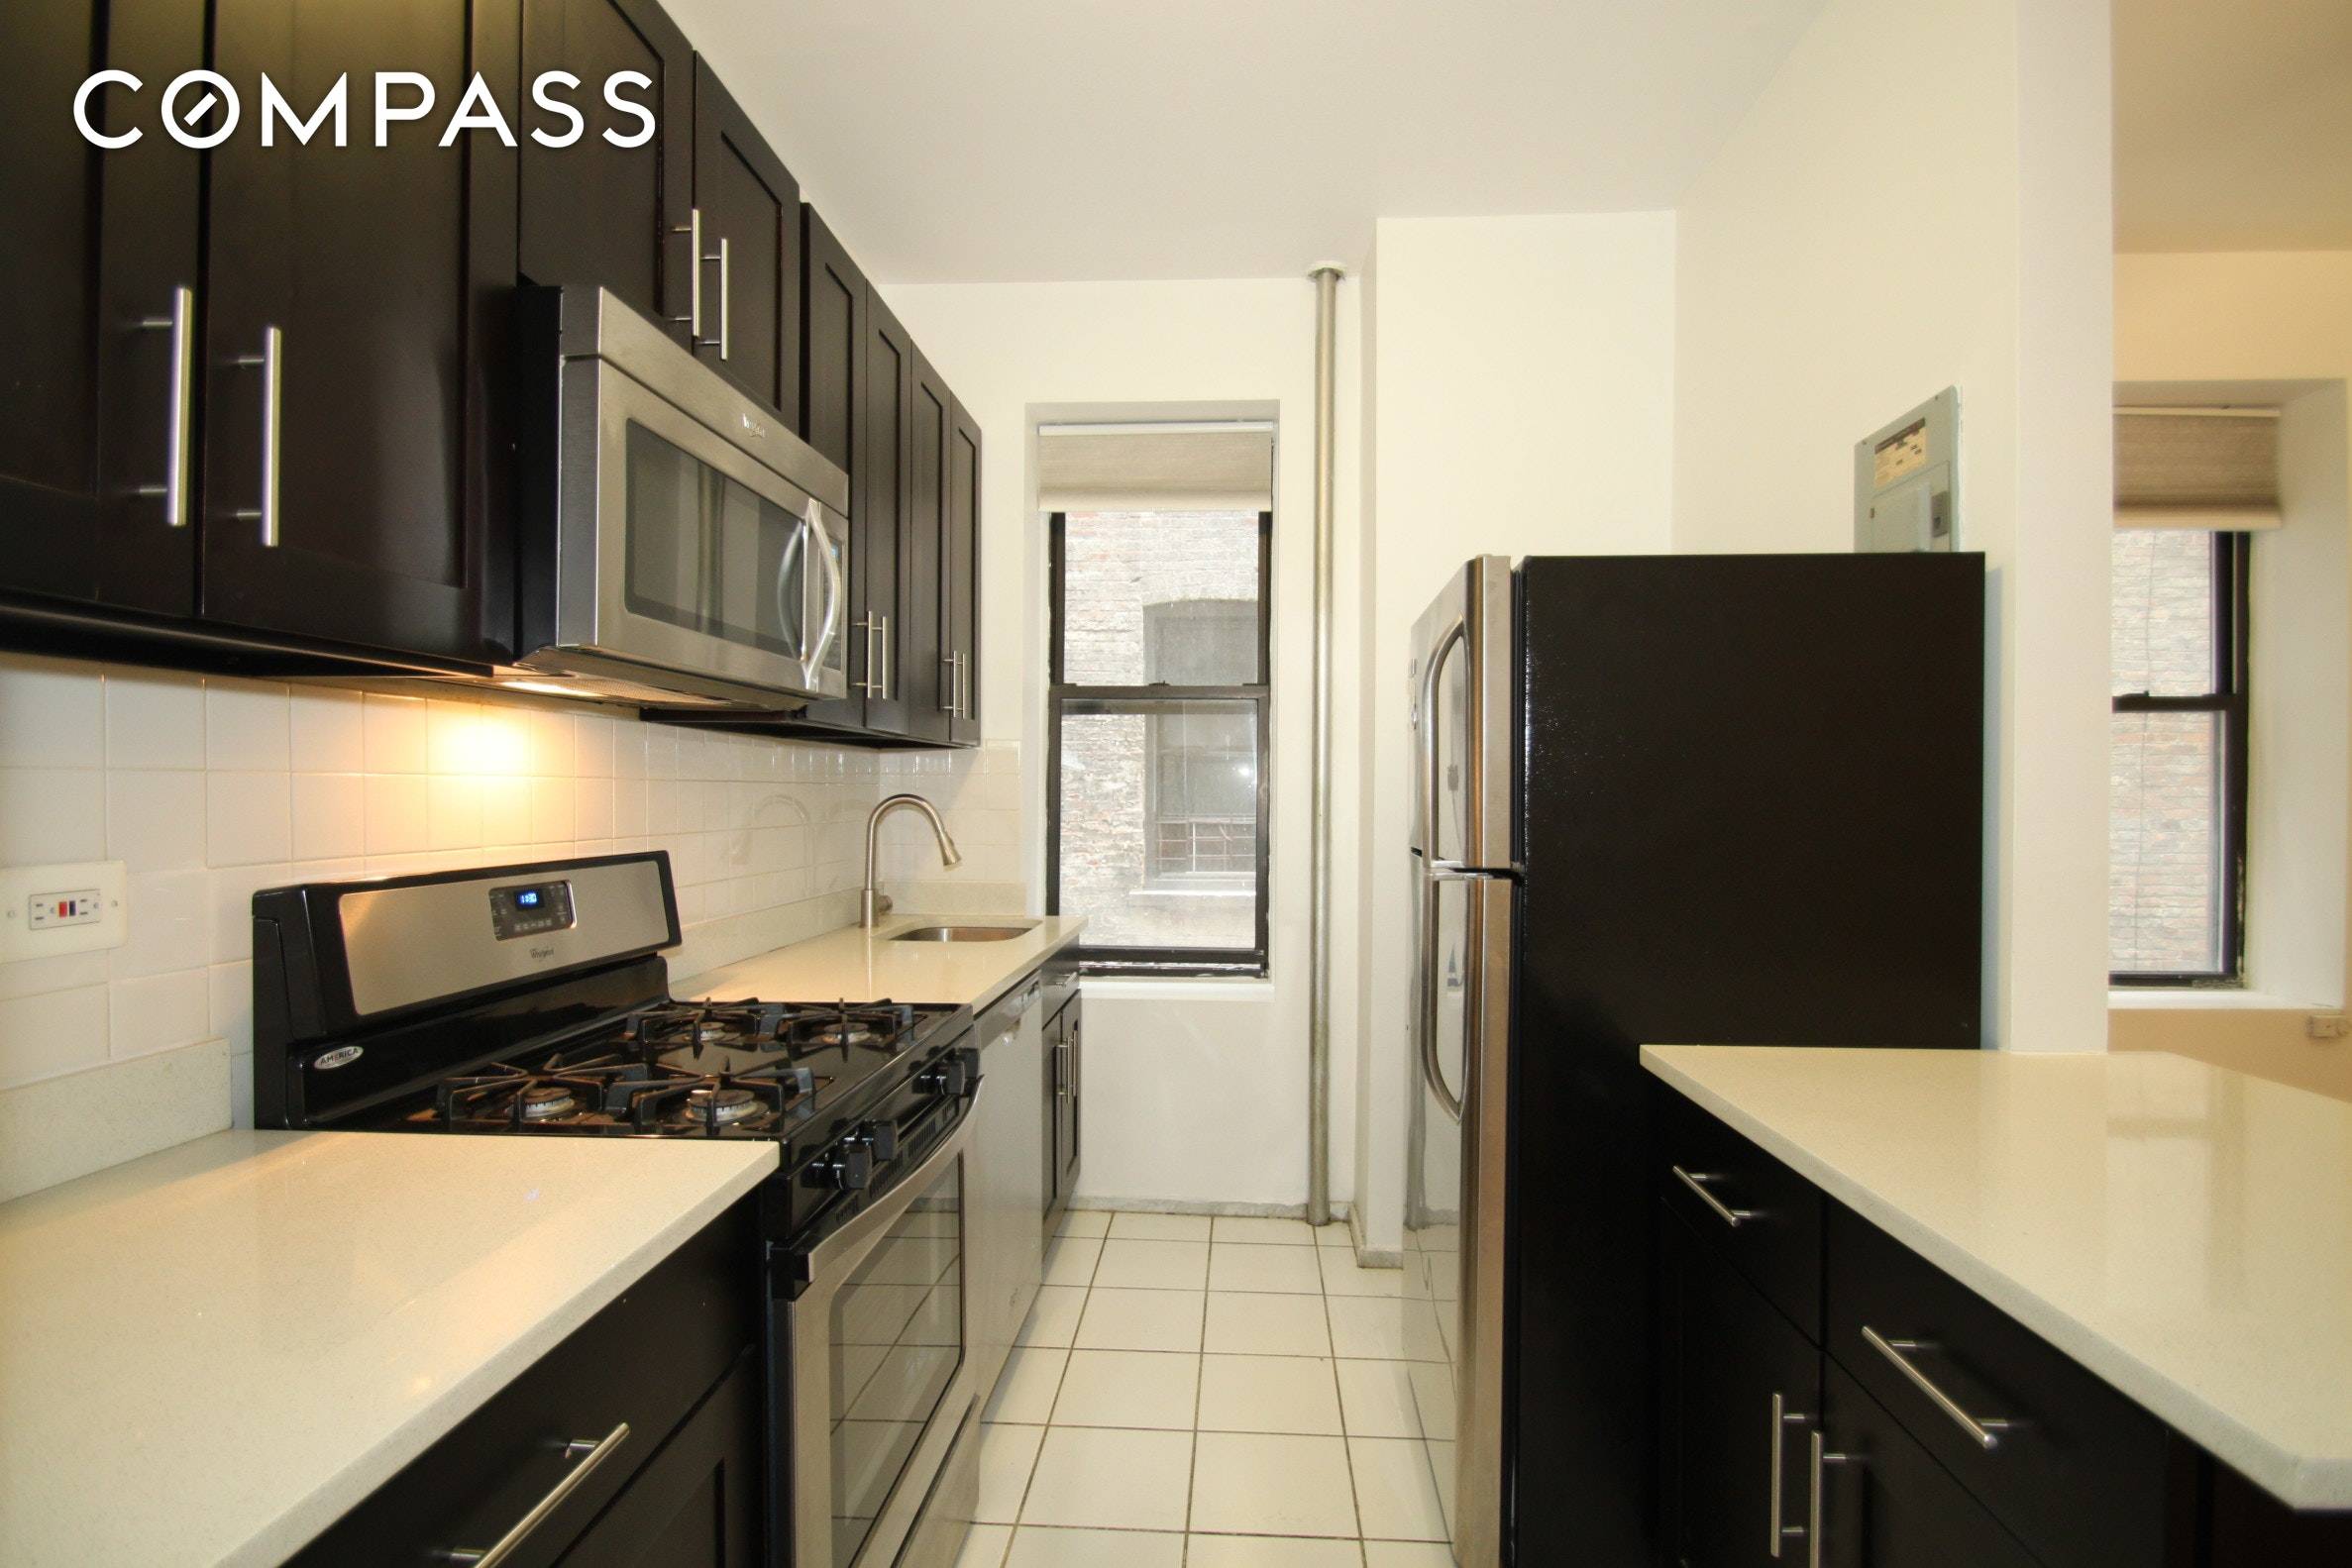 Welcome to 532 West 152nd Street located in the heart of the Hamilton Heights neighborhood of New York City.